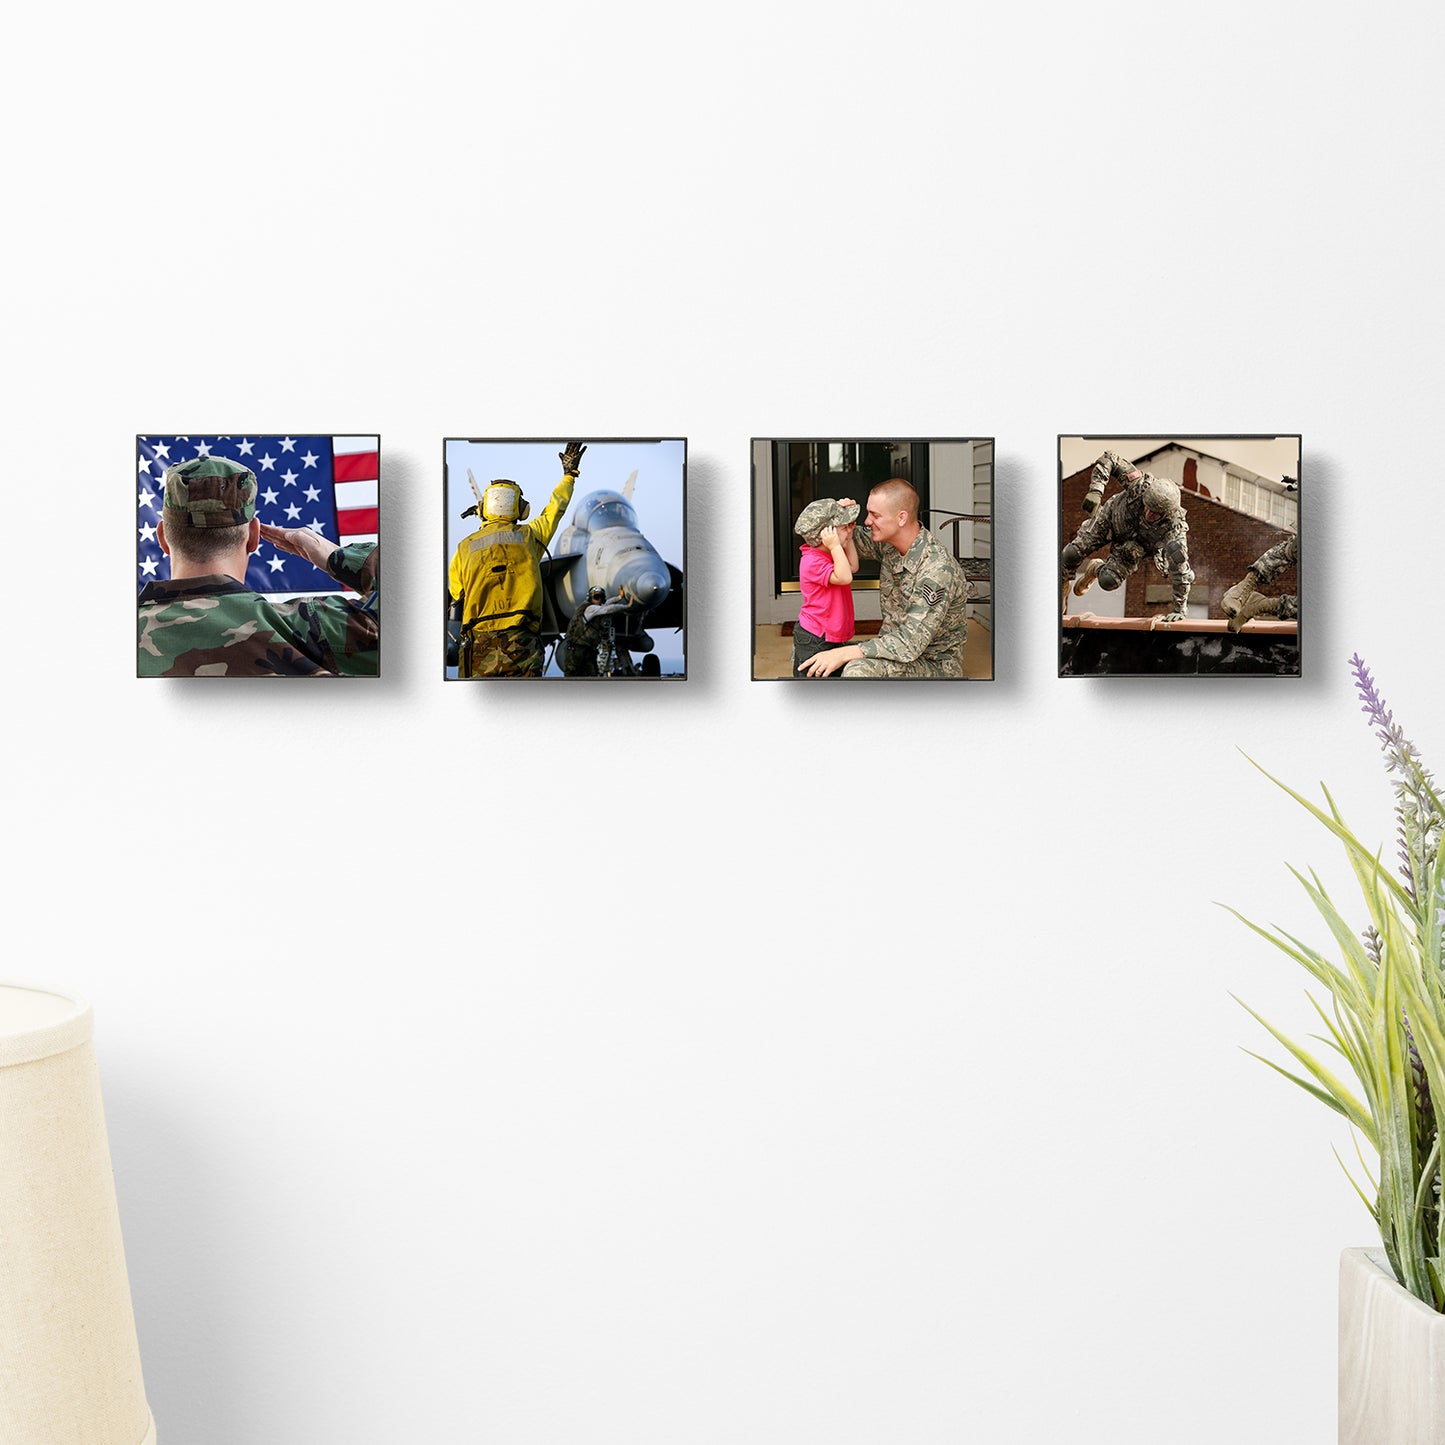 Realnique Black 4x4 Picture Frames [4 pack] Patented wall-mounted socket enables quick frame changing, rotating, and floating off-wall appearance. Front loading square photo frames.